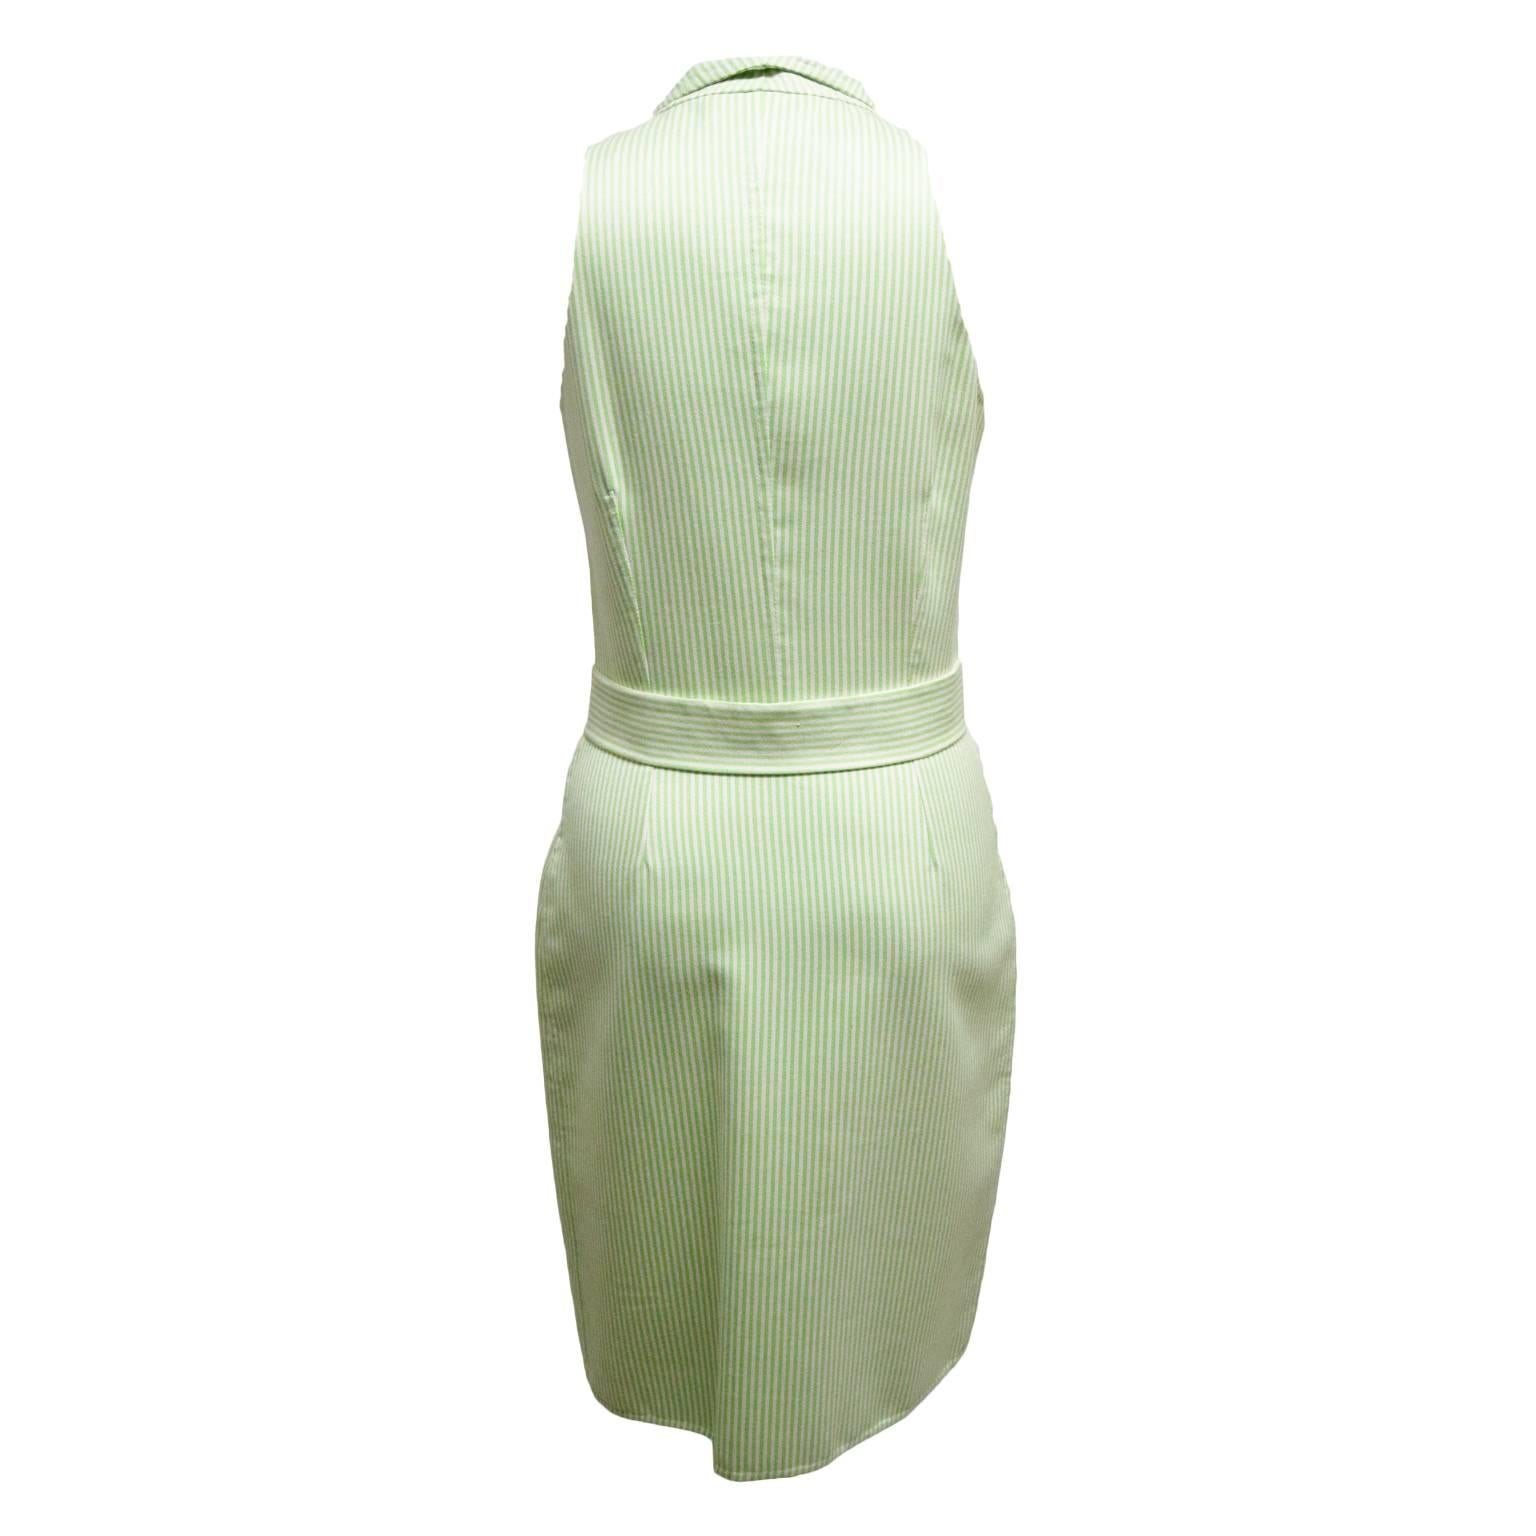 This effortless dress by Oscar de la Renta is made from 100% cotton. The print is a lime and ivory striped print and the dress is shirt waisted. The dress also has a detachable waist belt. The dress has frontal button closures, is sleeveless, and